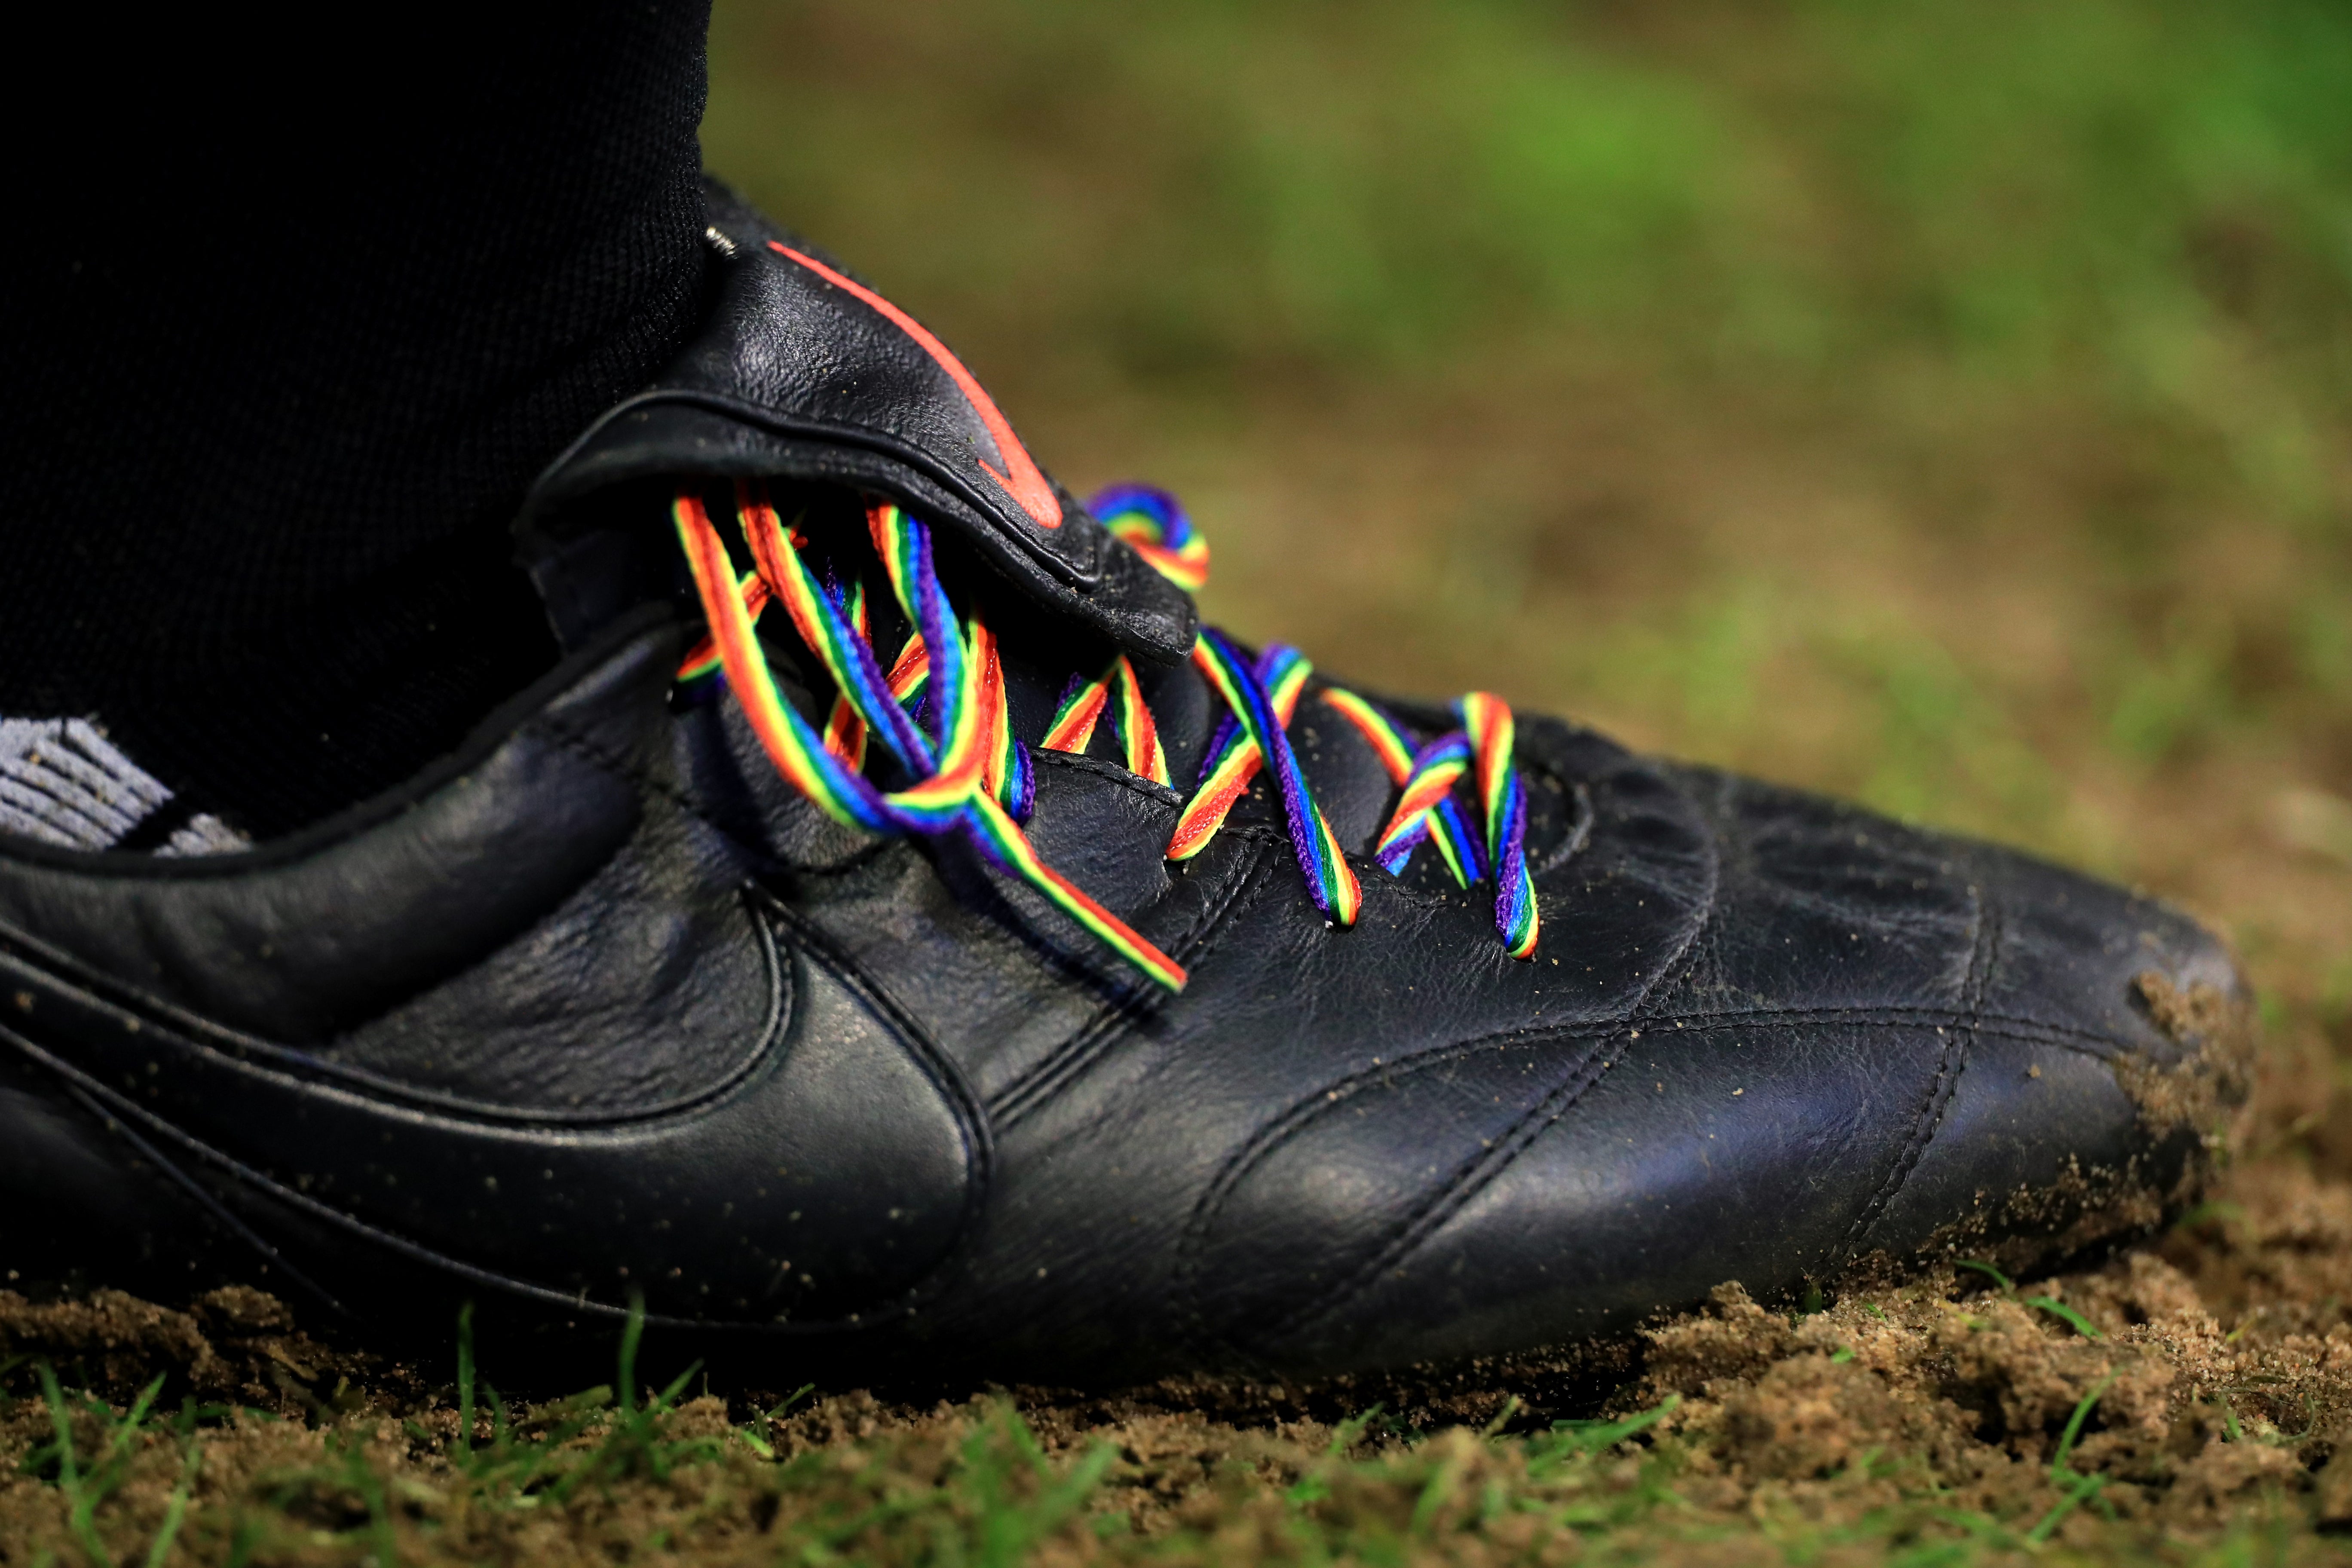 This year’s Rainbow Laces campaign kick starts on Thursday (Mike Egerton/PA)